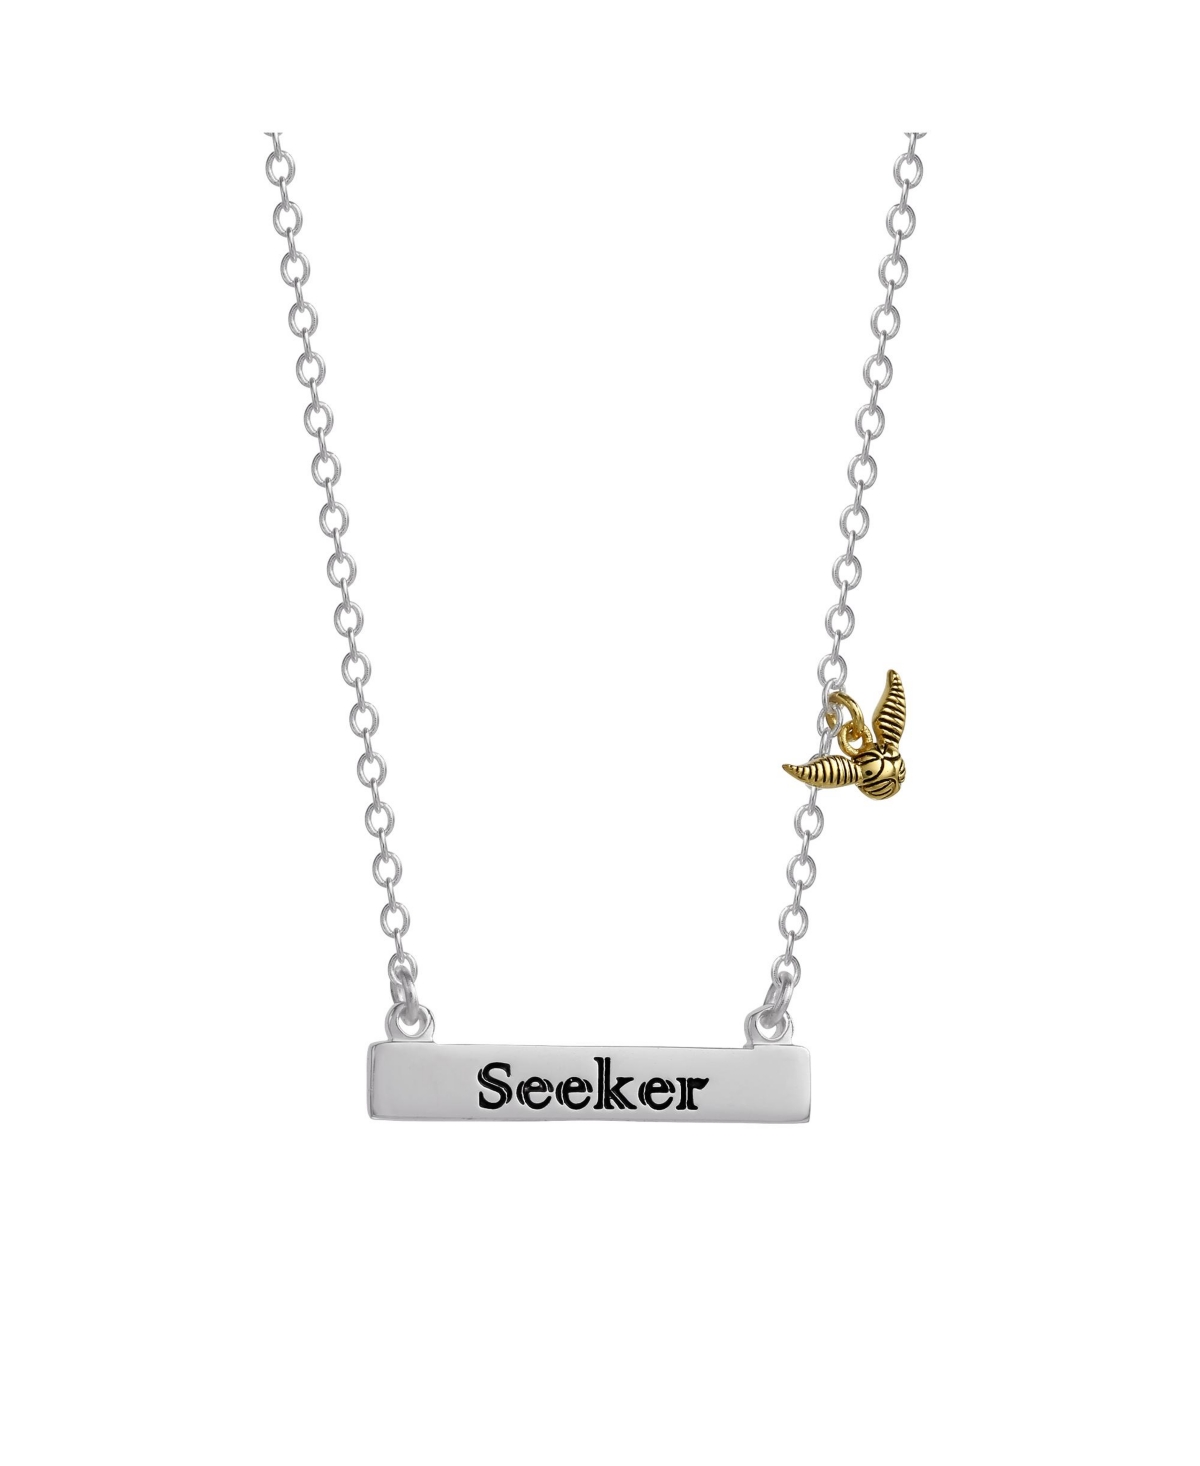 Seeker Bar Necklace with Golden Snitch Accent, 16 + 2'' - Silver tone